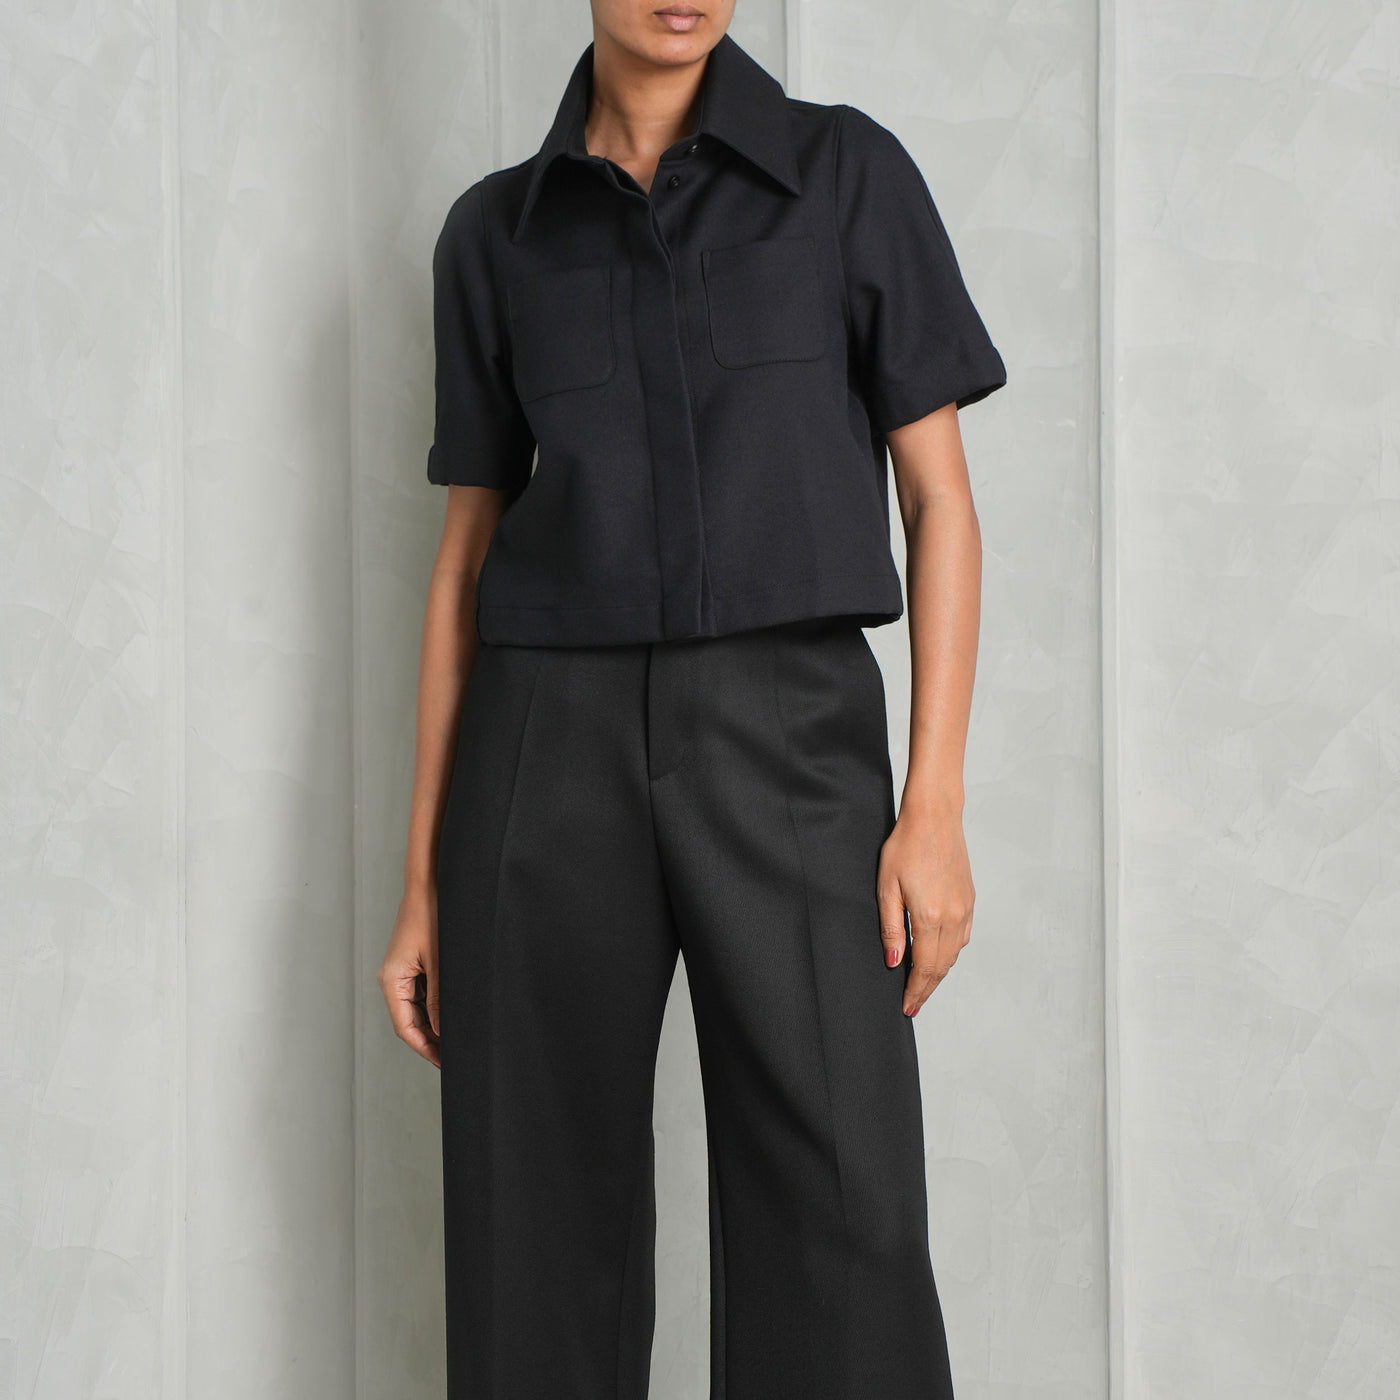 LOEWE black reproportioned shirt with buttons and pockets